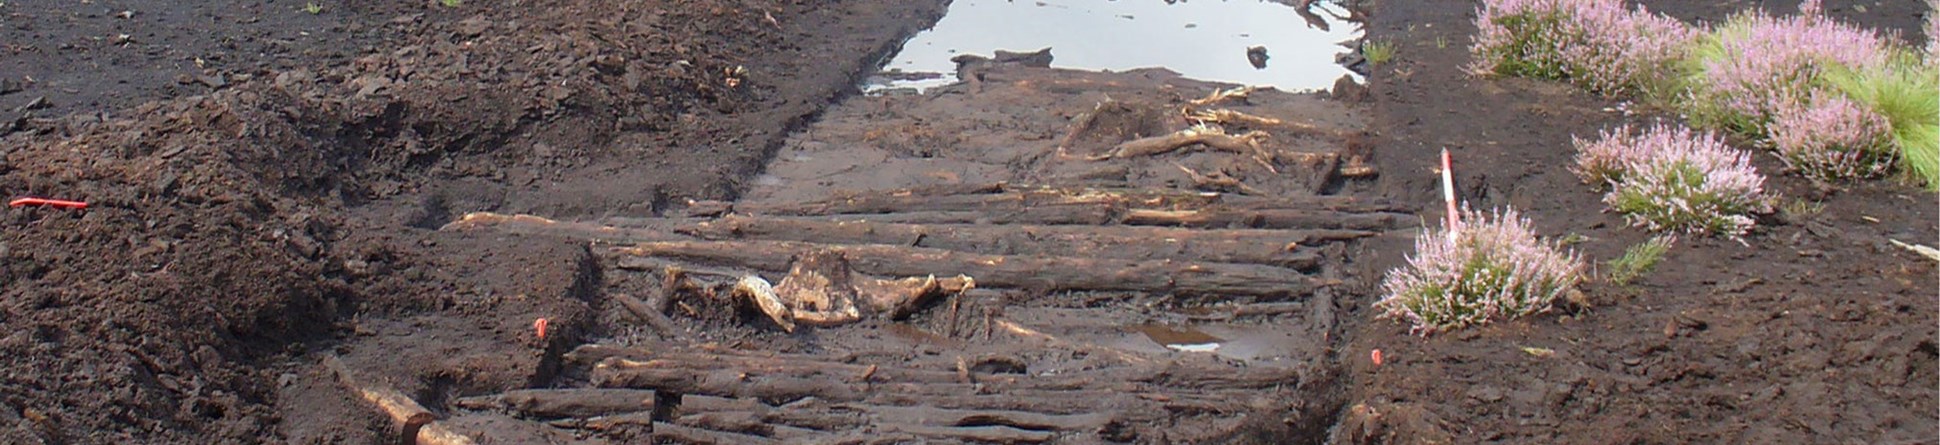 A well preserved wooden trackway being excavated in a peatland landscape.